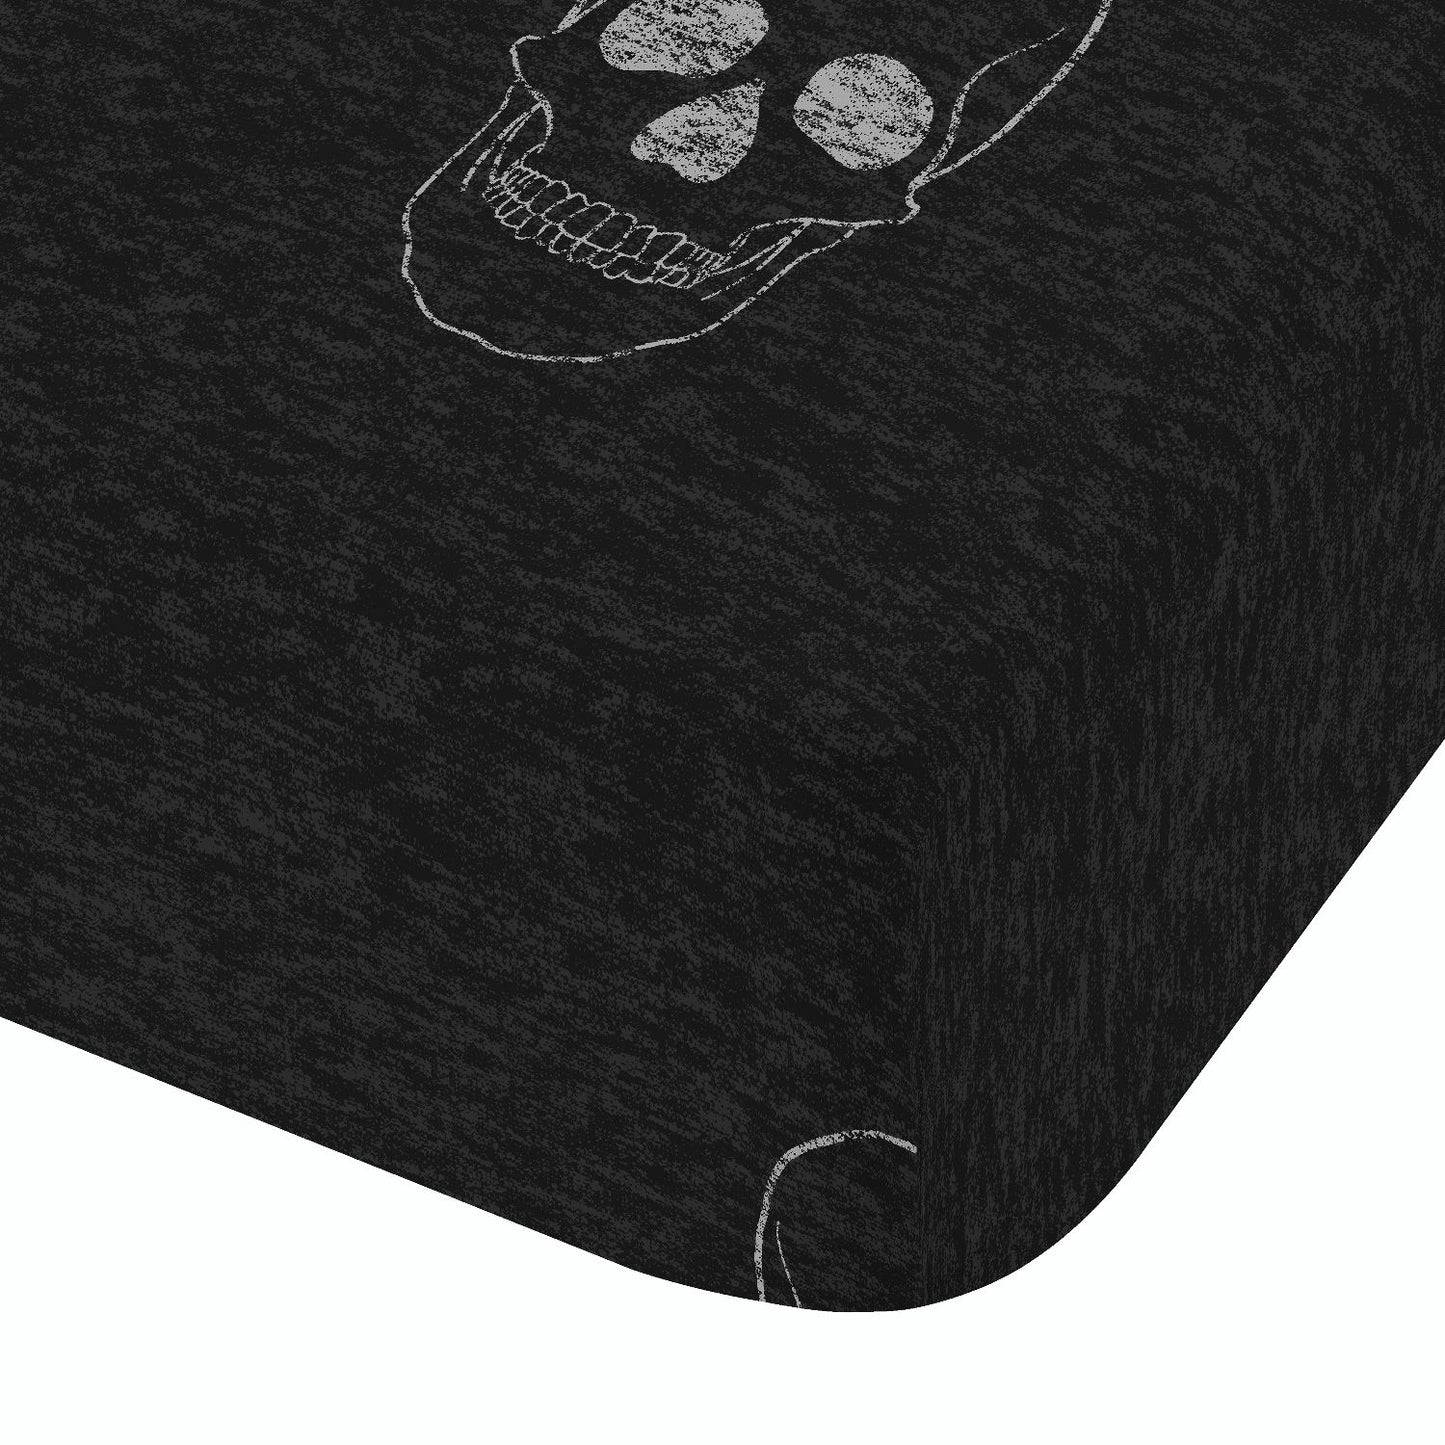 Catherine Lansfield Grey Skulls Fitted Sheet